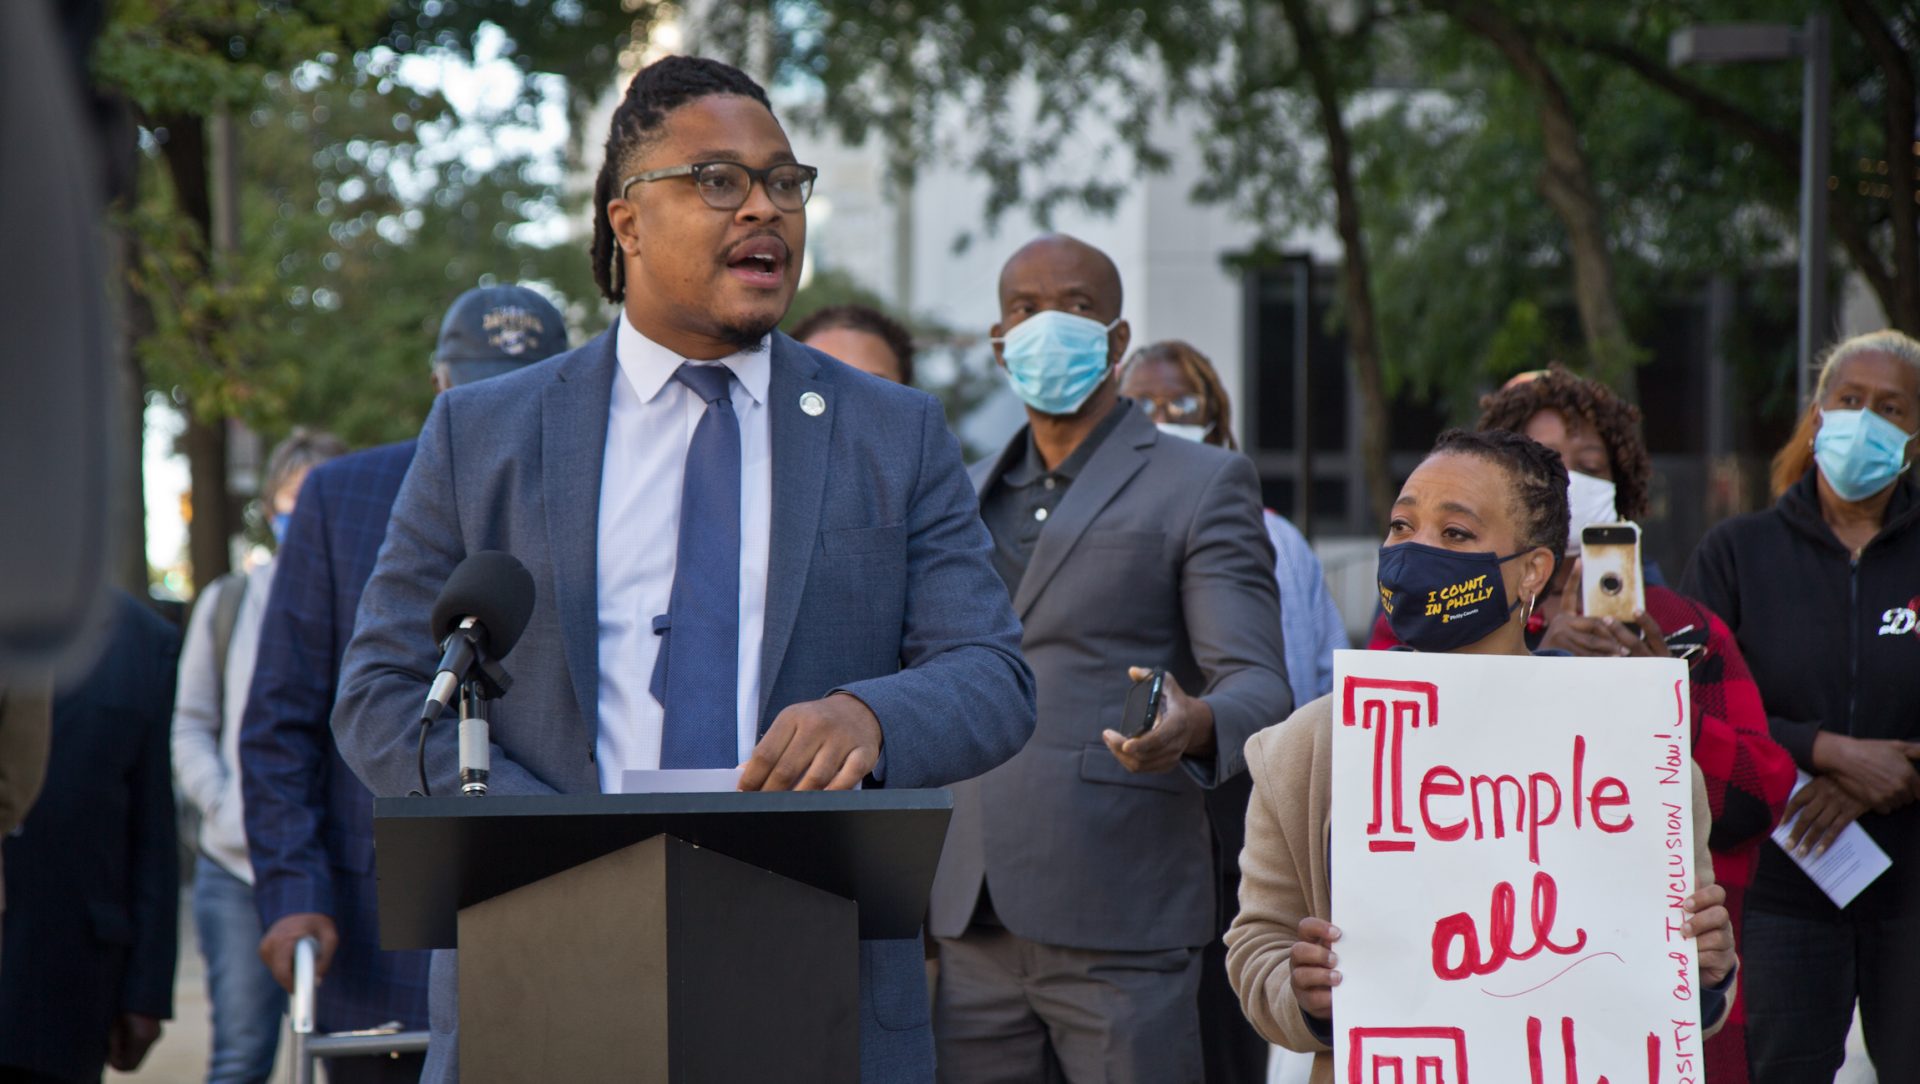 Pa. State Rep. Malcolm Kenyatta led a press conference on the campus of Temple University demand their Board of Trustees for a more inclusive and diverse search committee for a new University President.